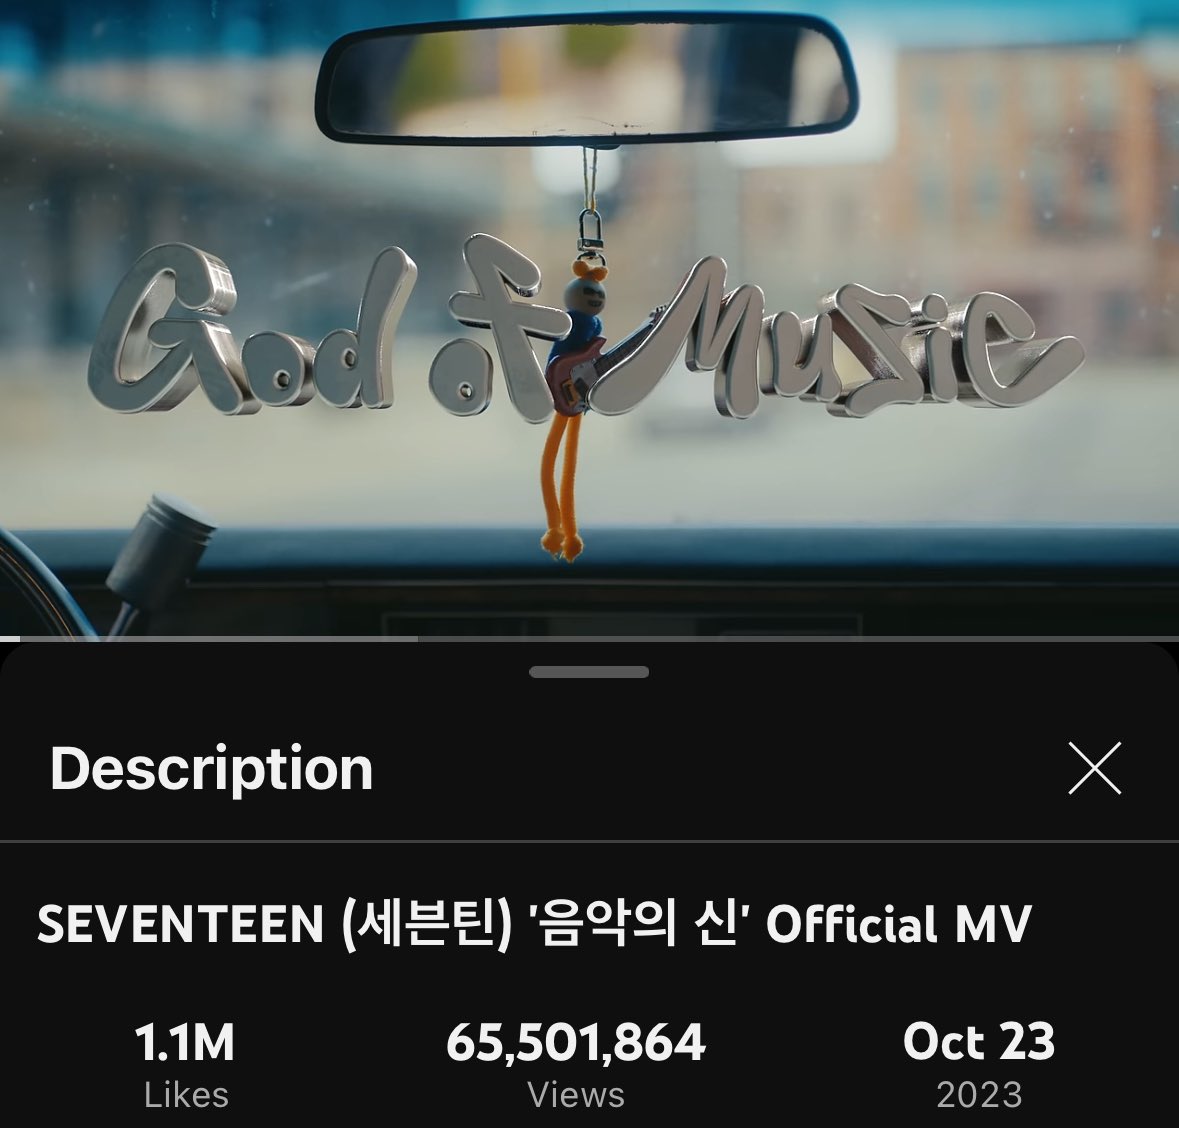 Caratdeul, we’re less than 225k views to 21M for Maestro! Use Super and GOM as fillers when you stream! Super is sooooo close to 200M and GOM needs the push for yearend awards🫶🏻🩷🩵 Let’s do this!